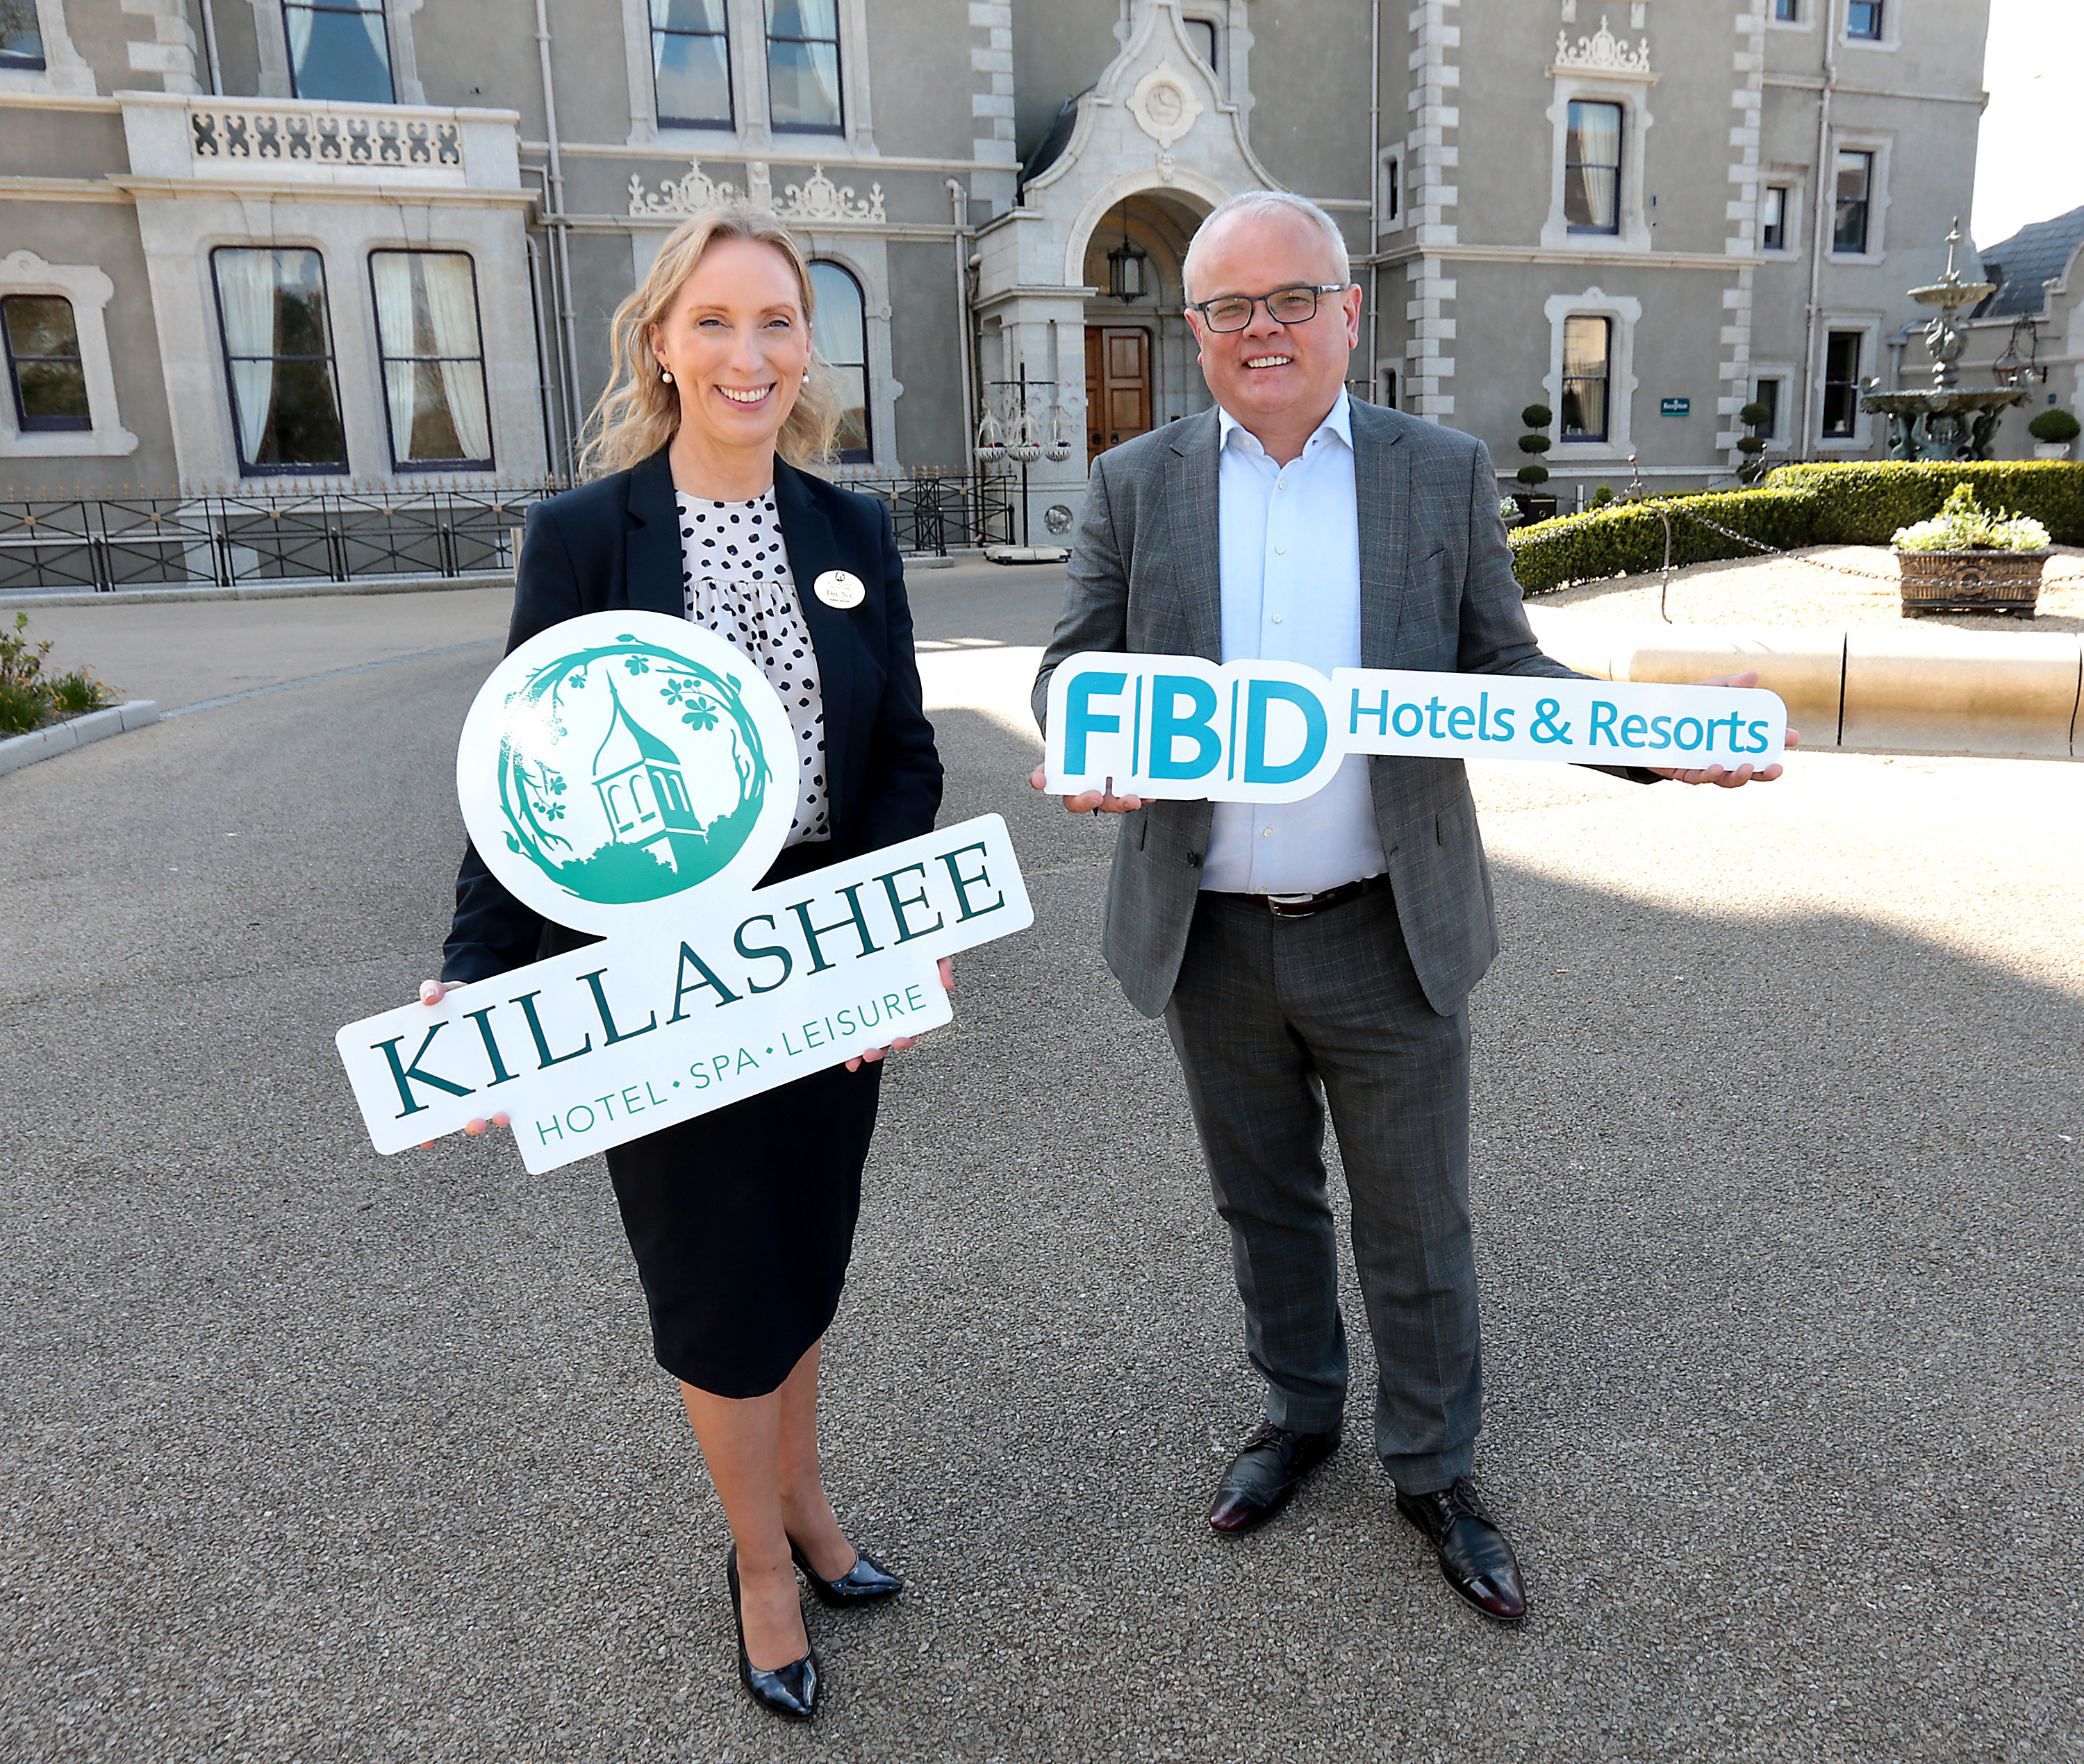 ‘The New Chapter Of The Killashee Story Begins’ As The Hotel Joins The FBD Hotels & Resorts Family